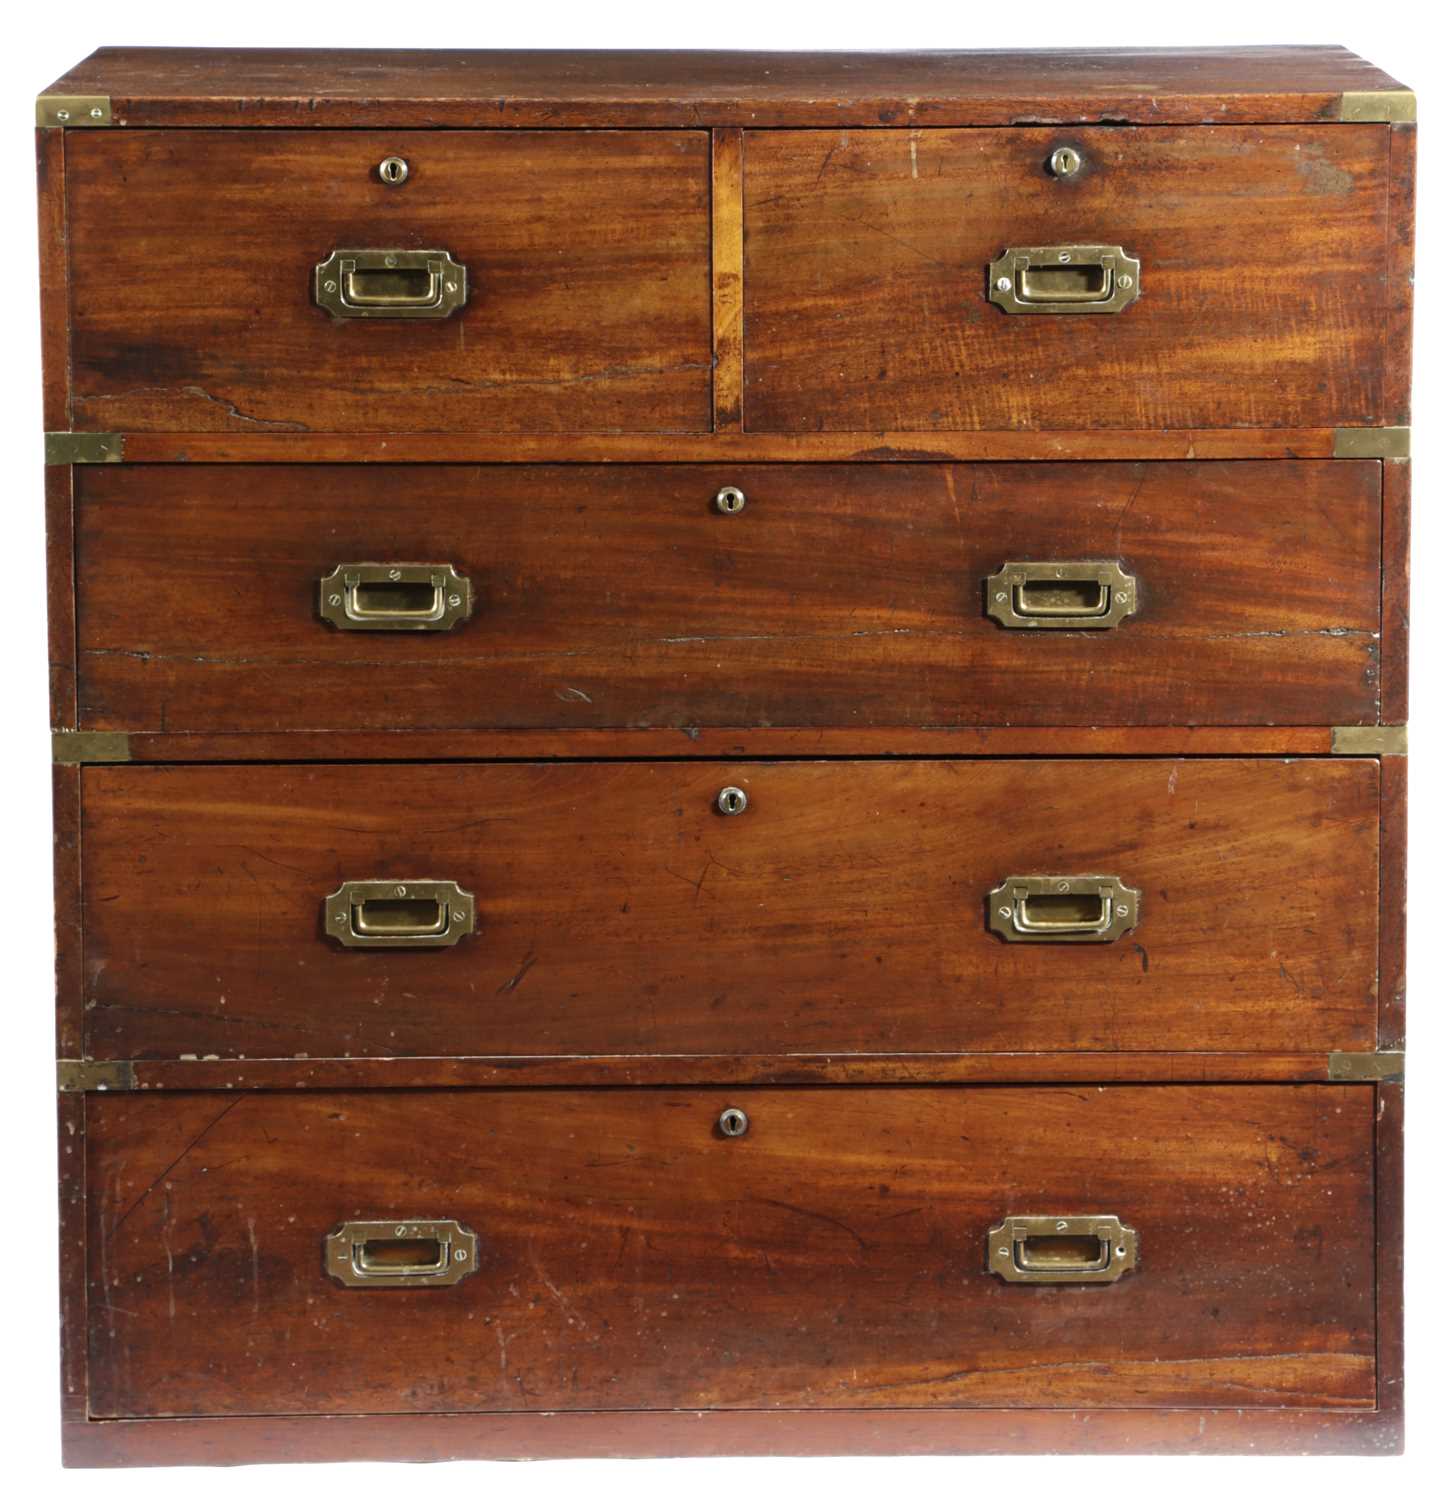 AN VICTORIAN IRISH MAHOGANY SECRETAIRE CAMPAIGN CHEST BY ROSS & CO., DUBLIN, C.1860-70 in two halves